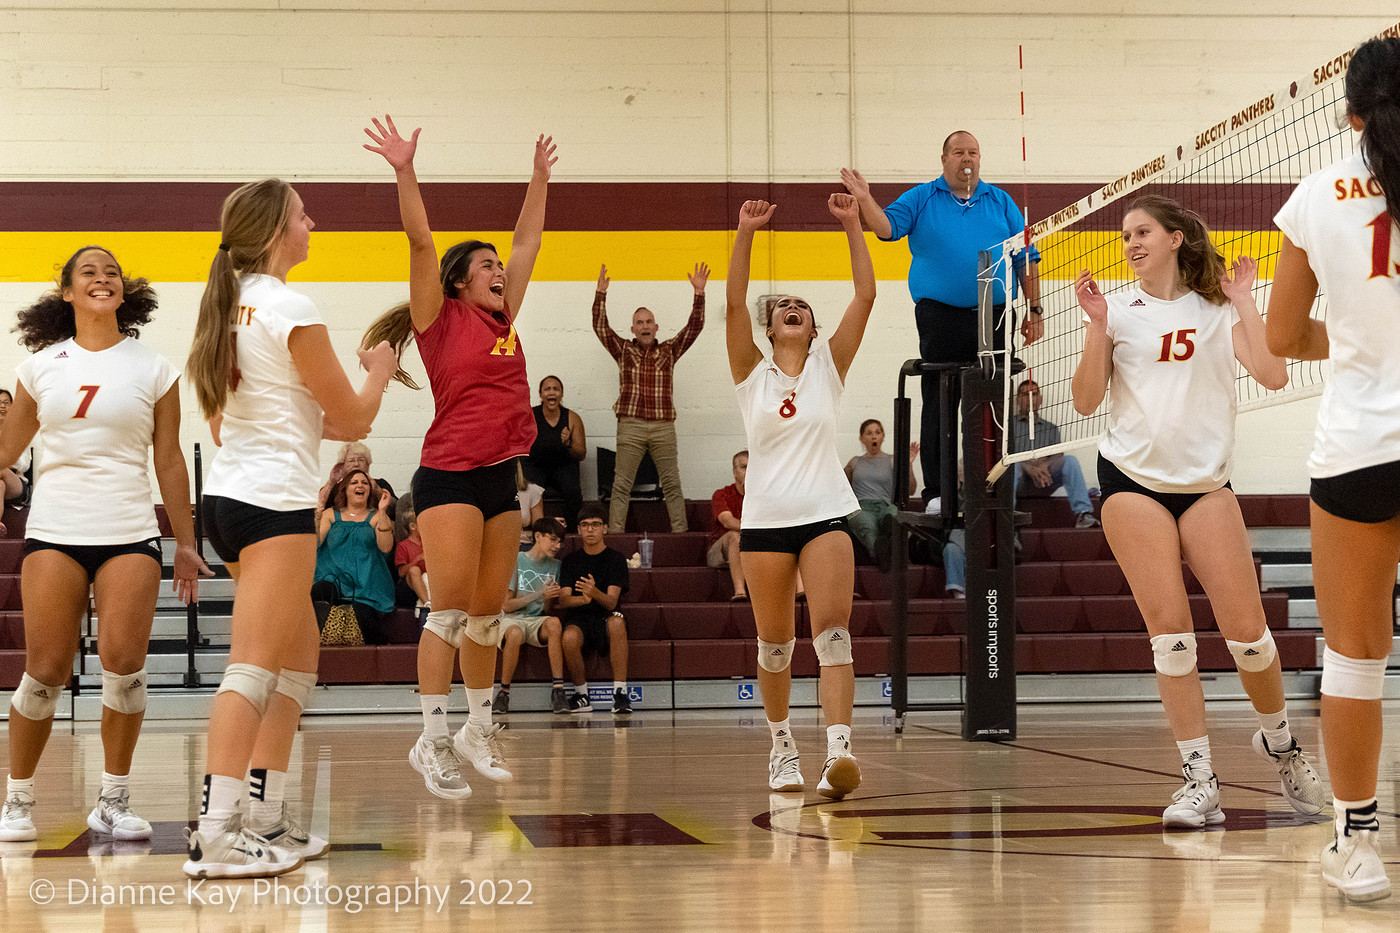 Sac City goes the distance on Friday and comes away with a 3-2 (25-22, 15-25, 25-14, 15-25, 16-14) win over the Falcons